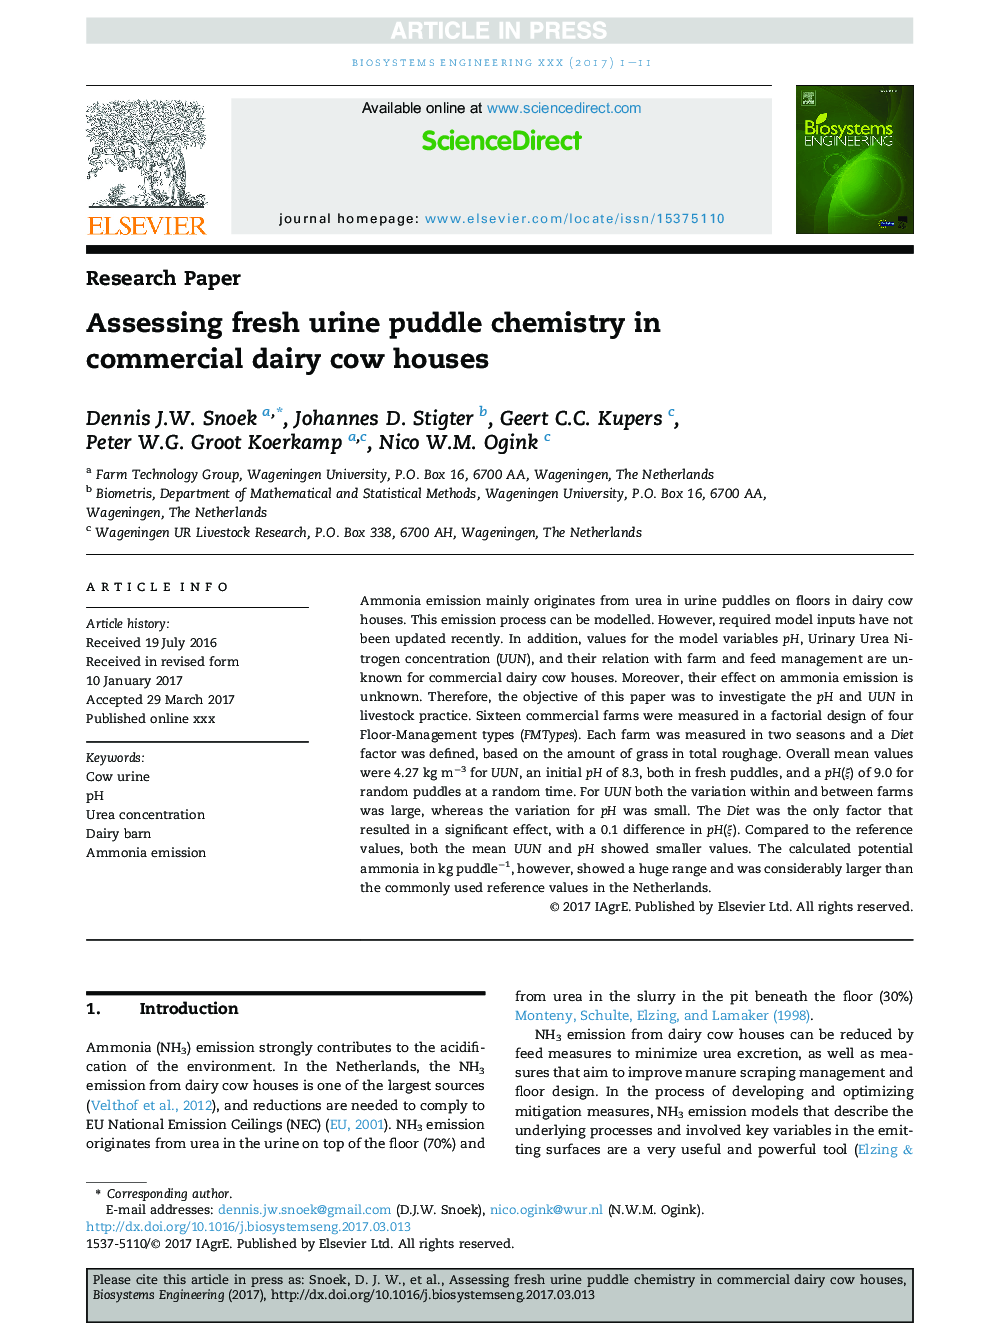 Assessing fresh urine puddle chemistry in commercial dairy cow houses